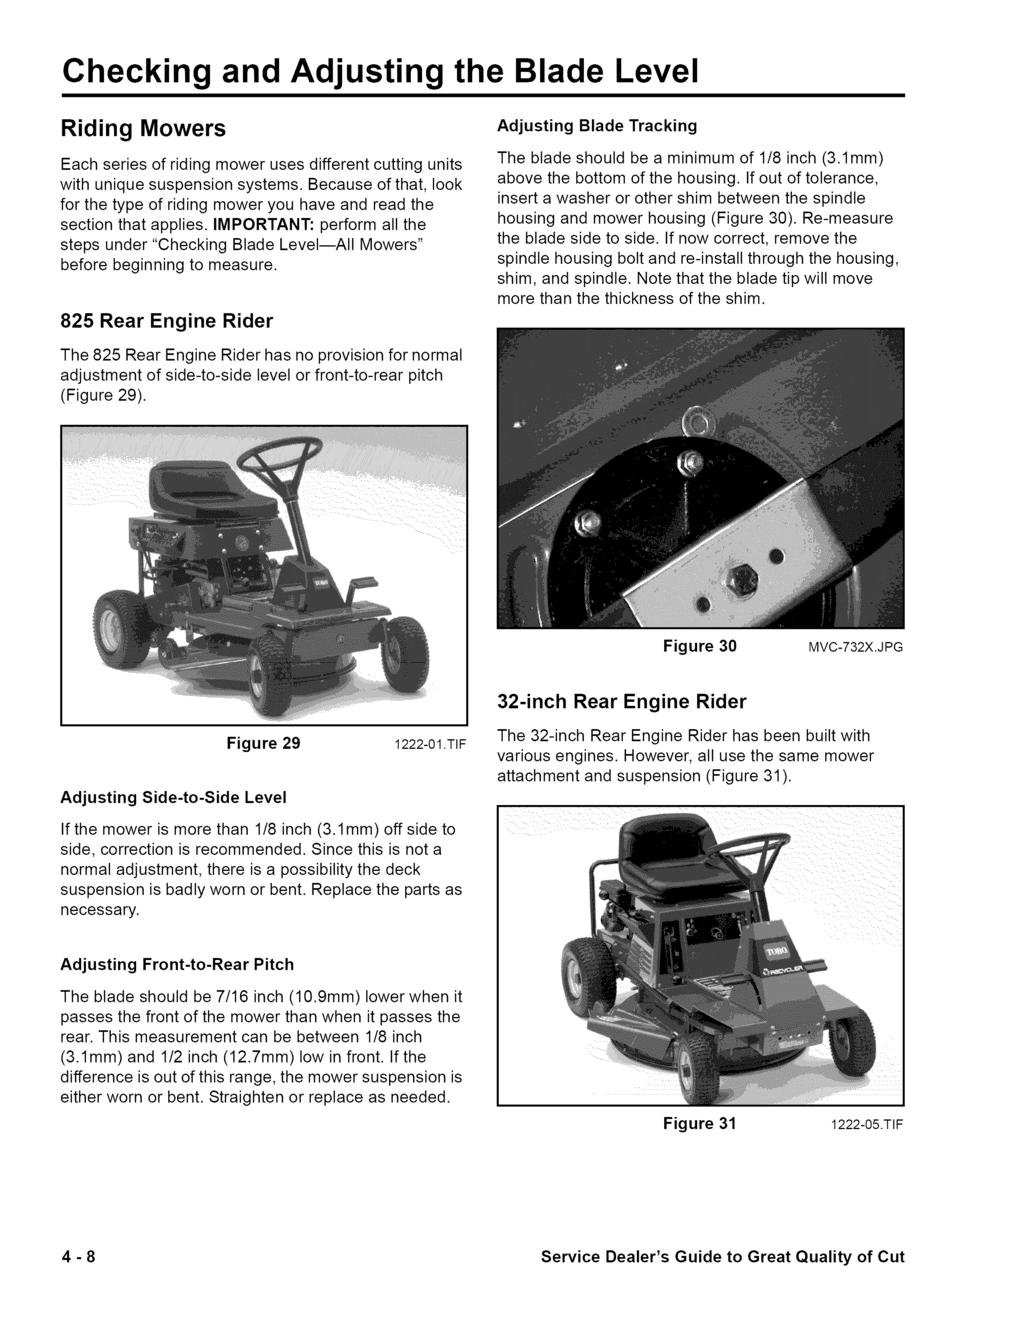 Checking and Adjusting the Blade Level Riding Mowers Each series of riding mower uses different cutting units with unique suspension systems.